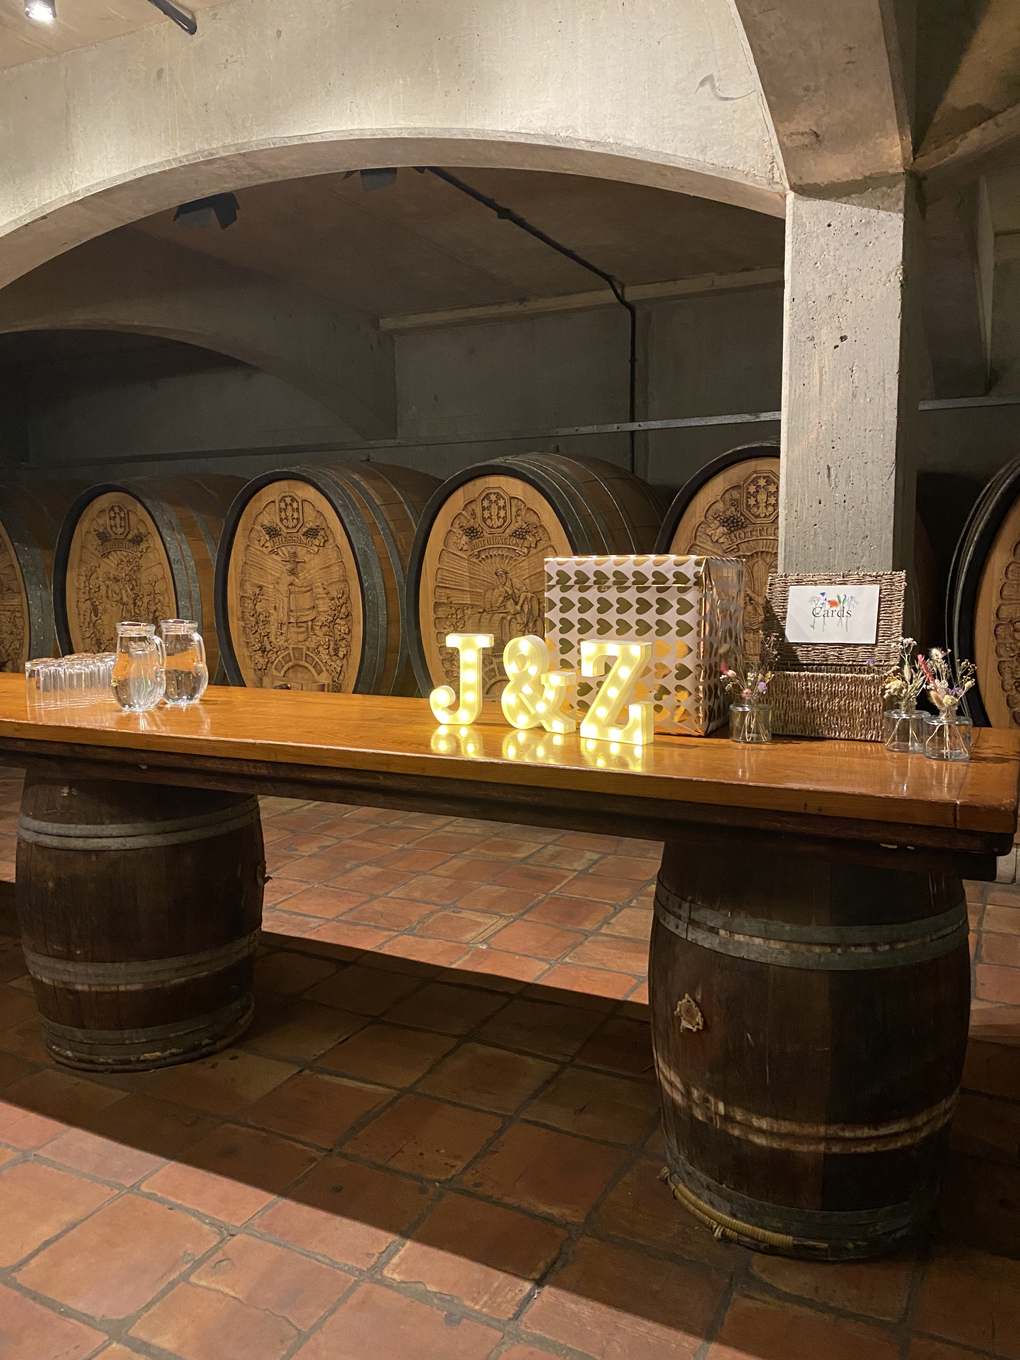 An underground wine cellar, with some large barrels in the background. In the foreground there are the letters J and K lit up in lights.